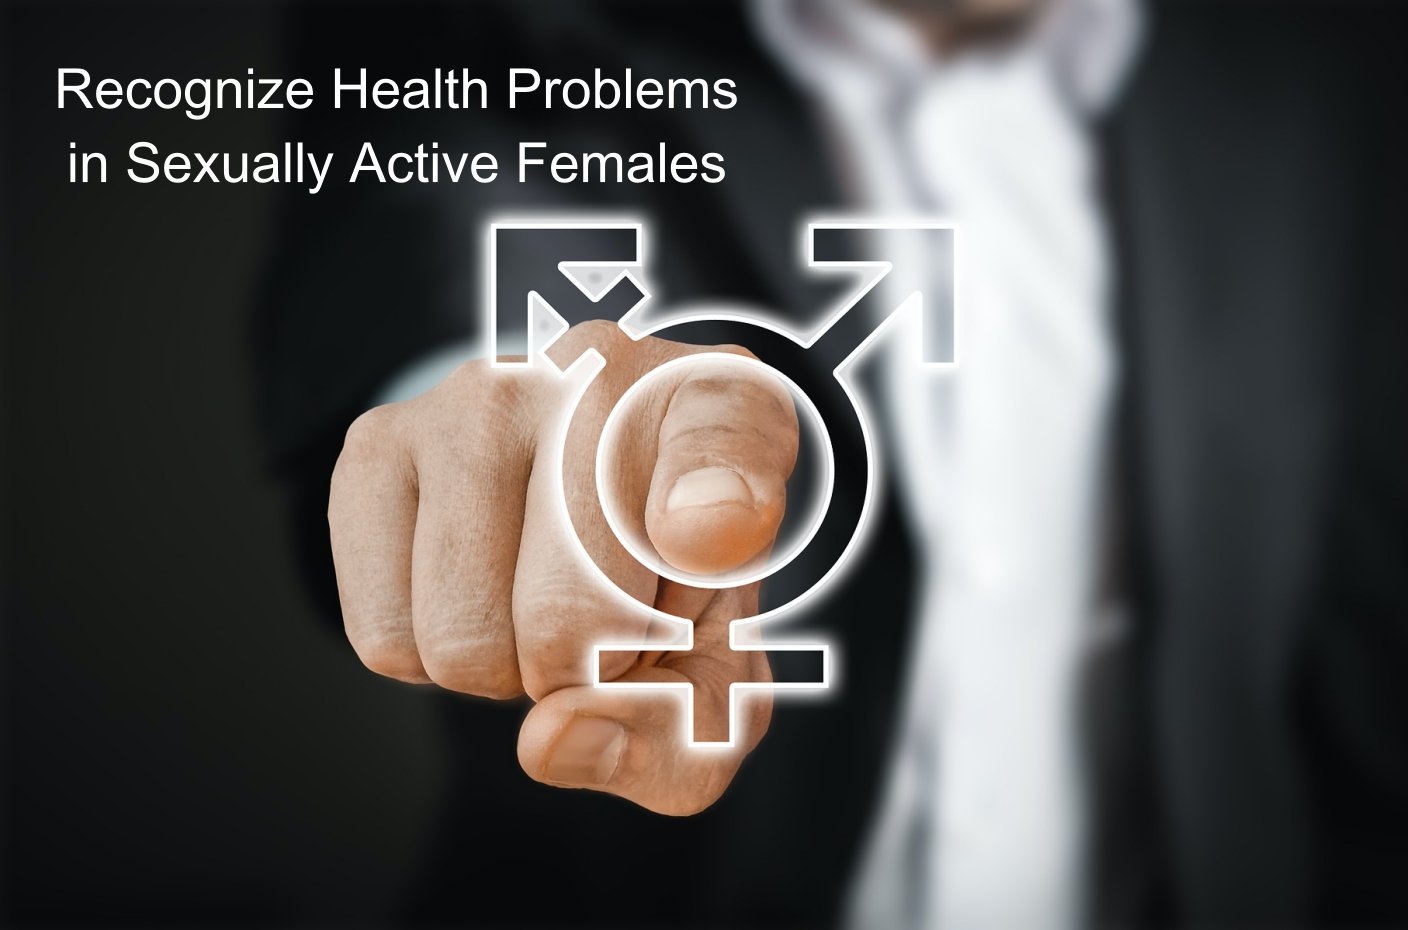 Recognize Health Problems in Sexually Active Females